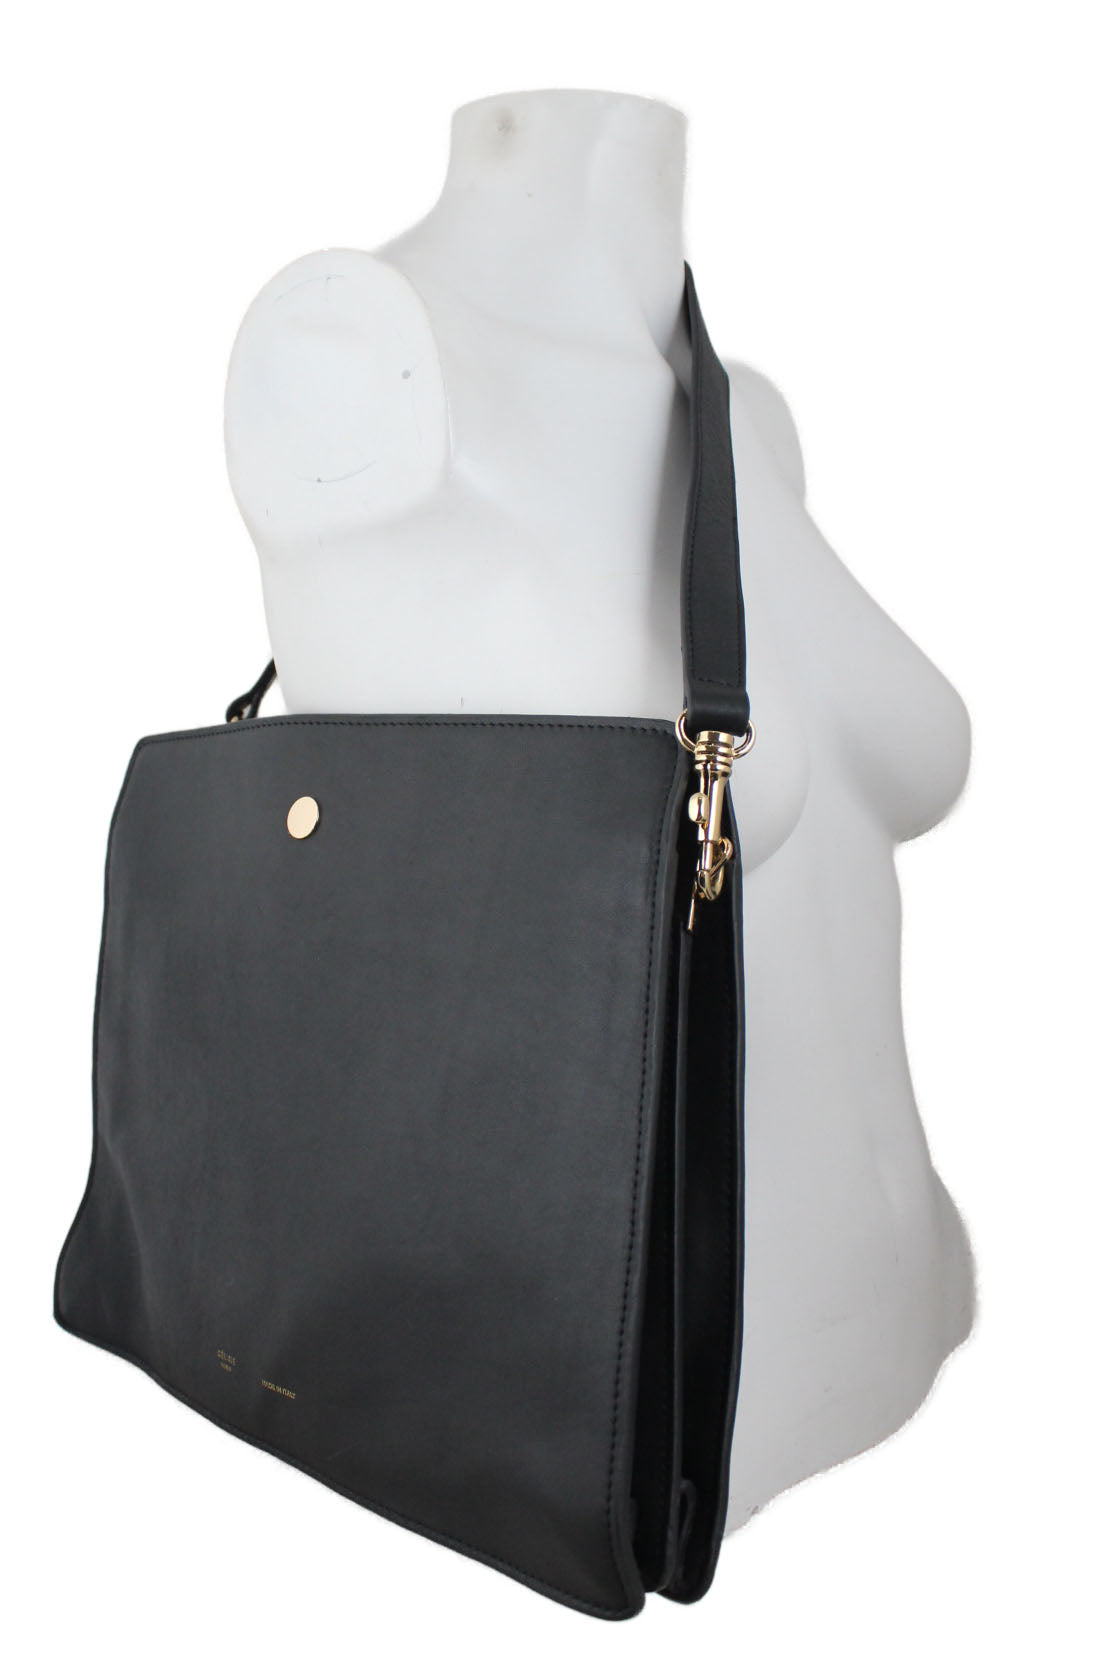 celine bag wore by mannequin for sizing. 